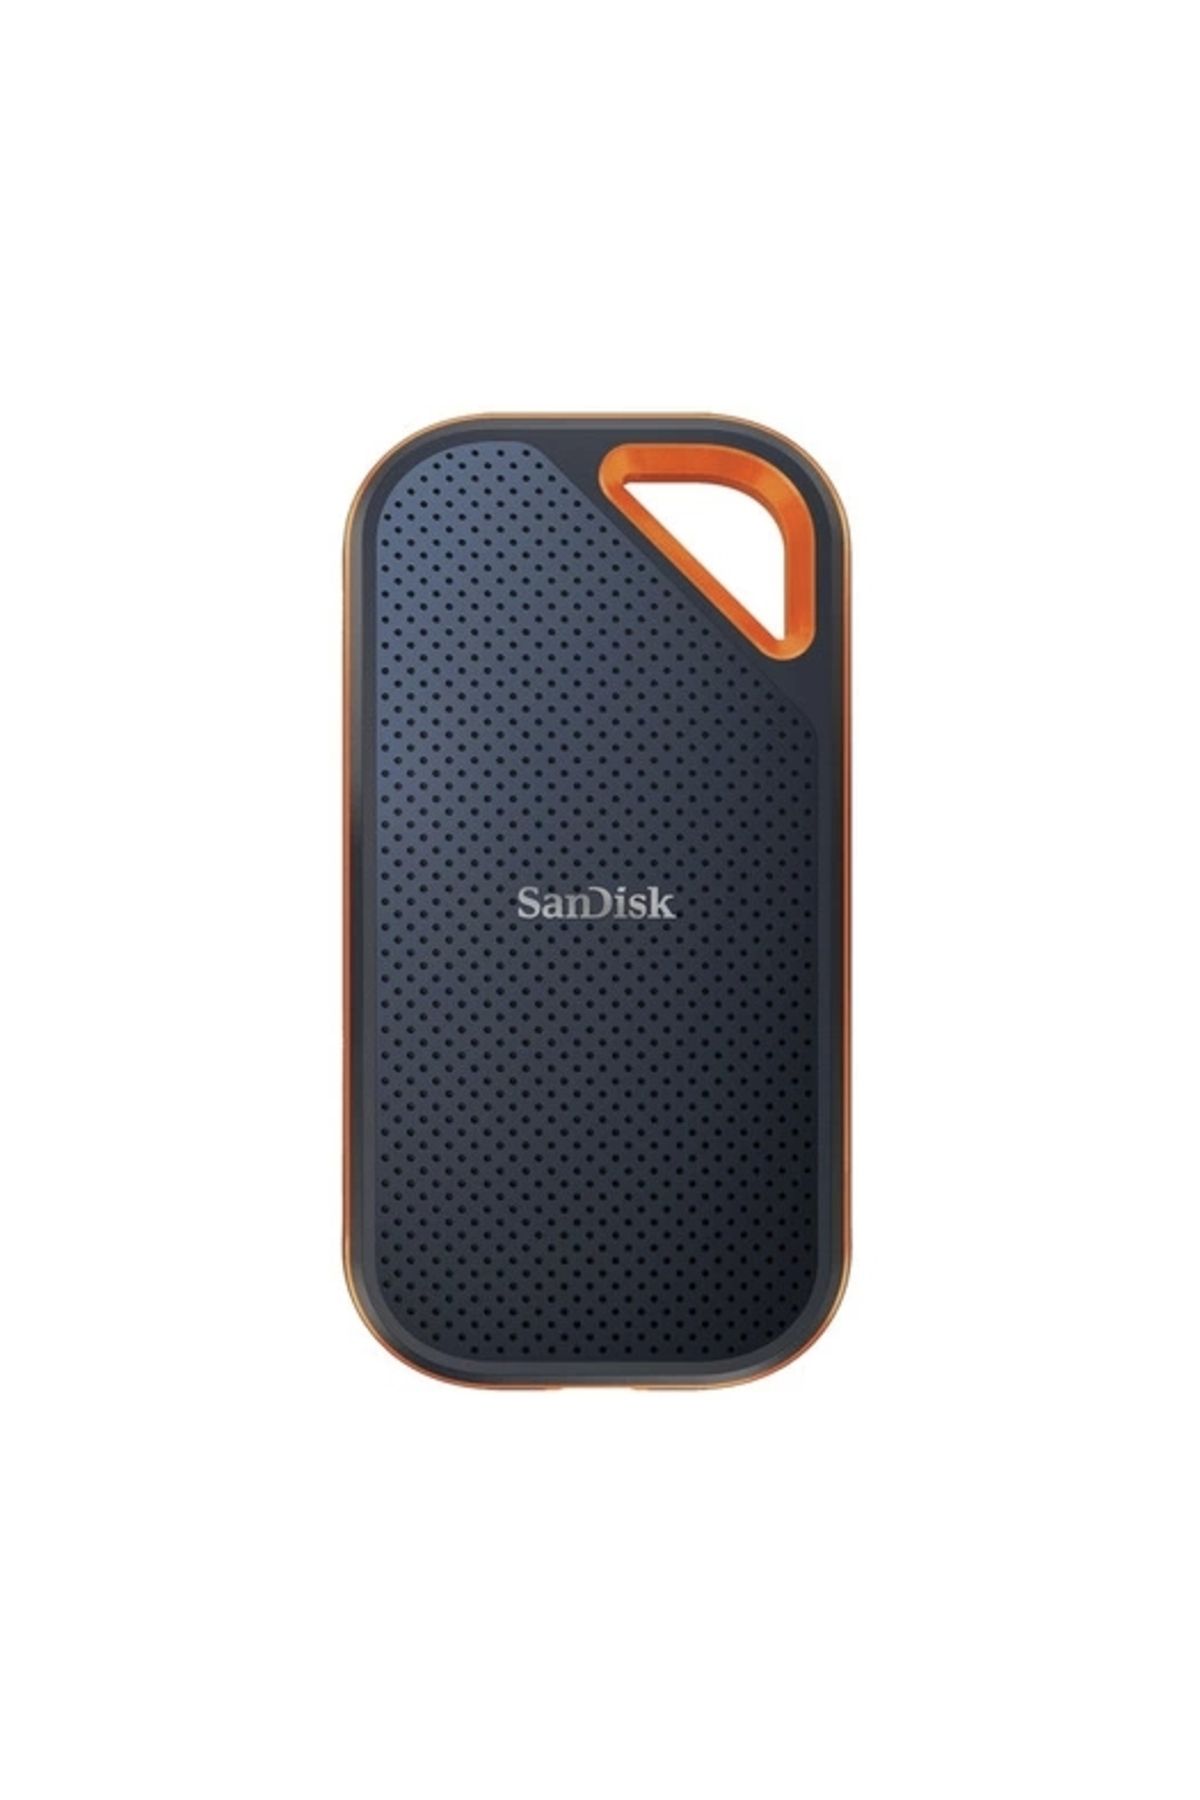 Sandisk Extreme Pro Portable Ssd 2000mb/